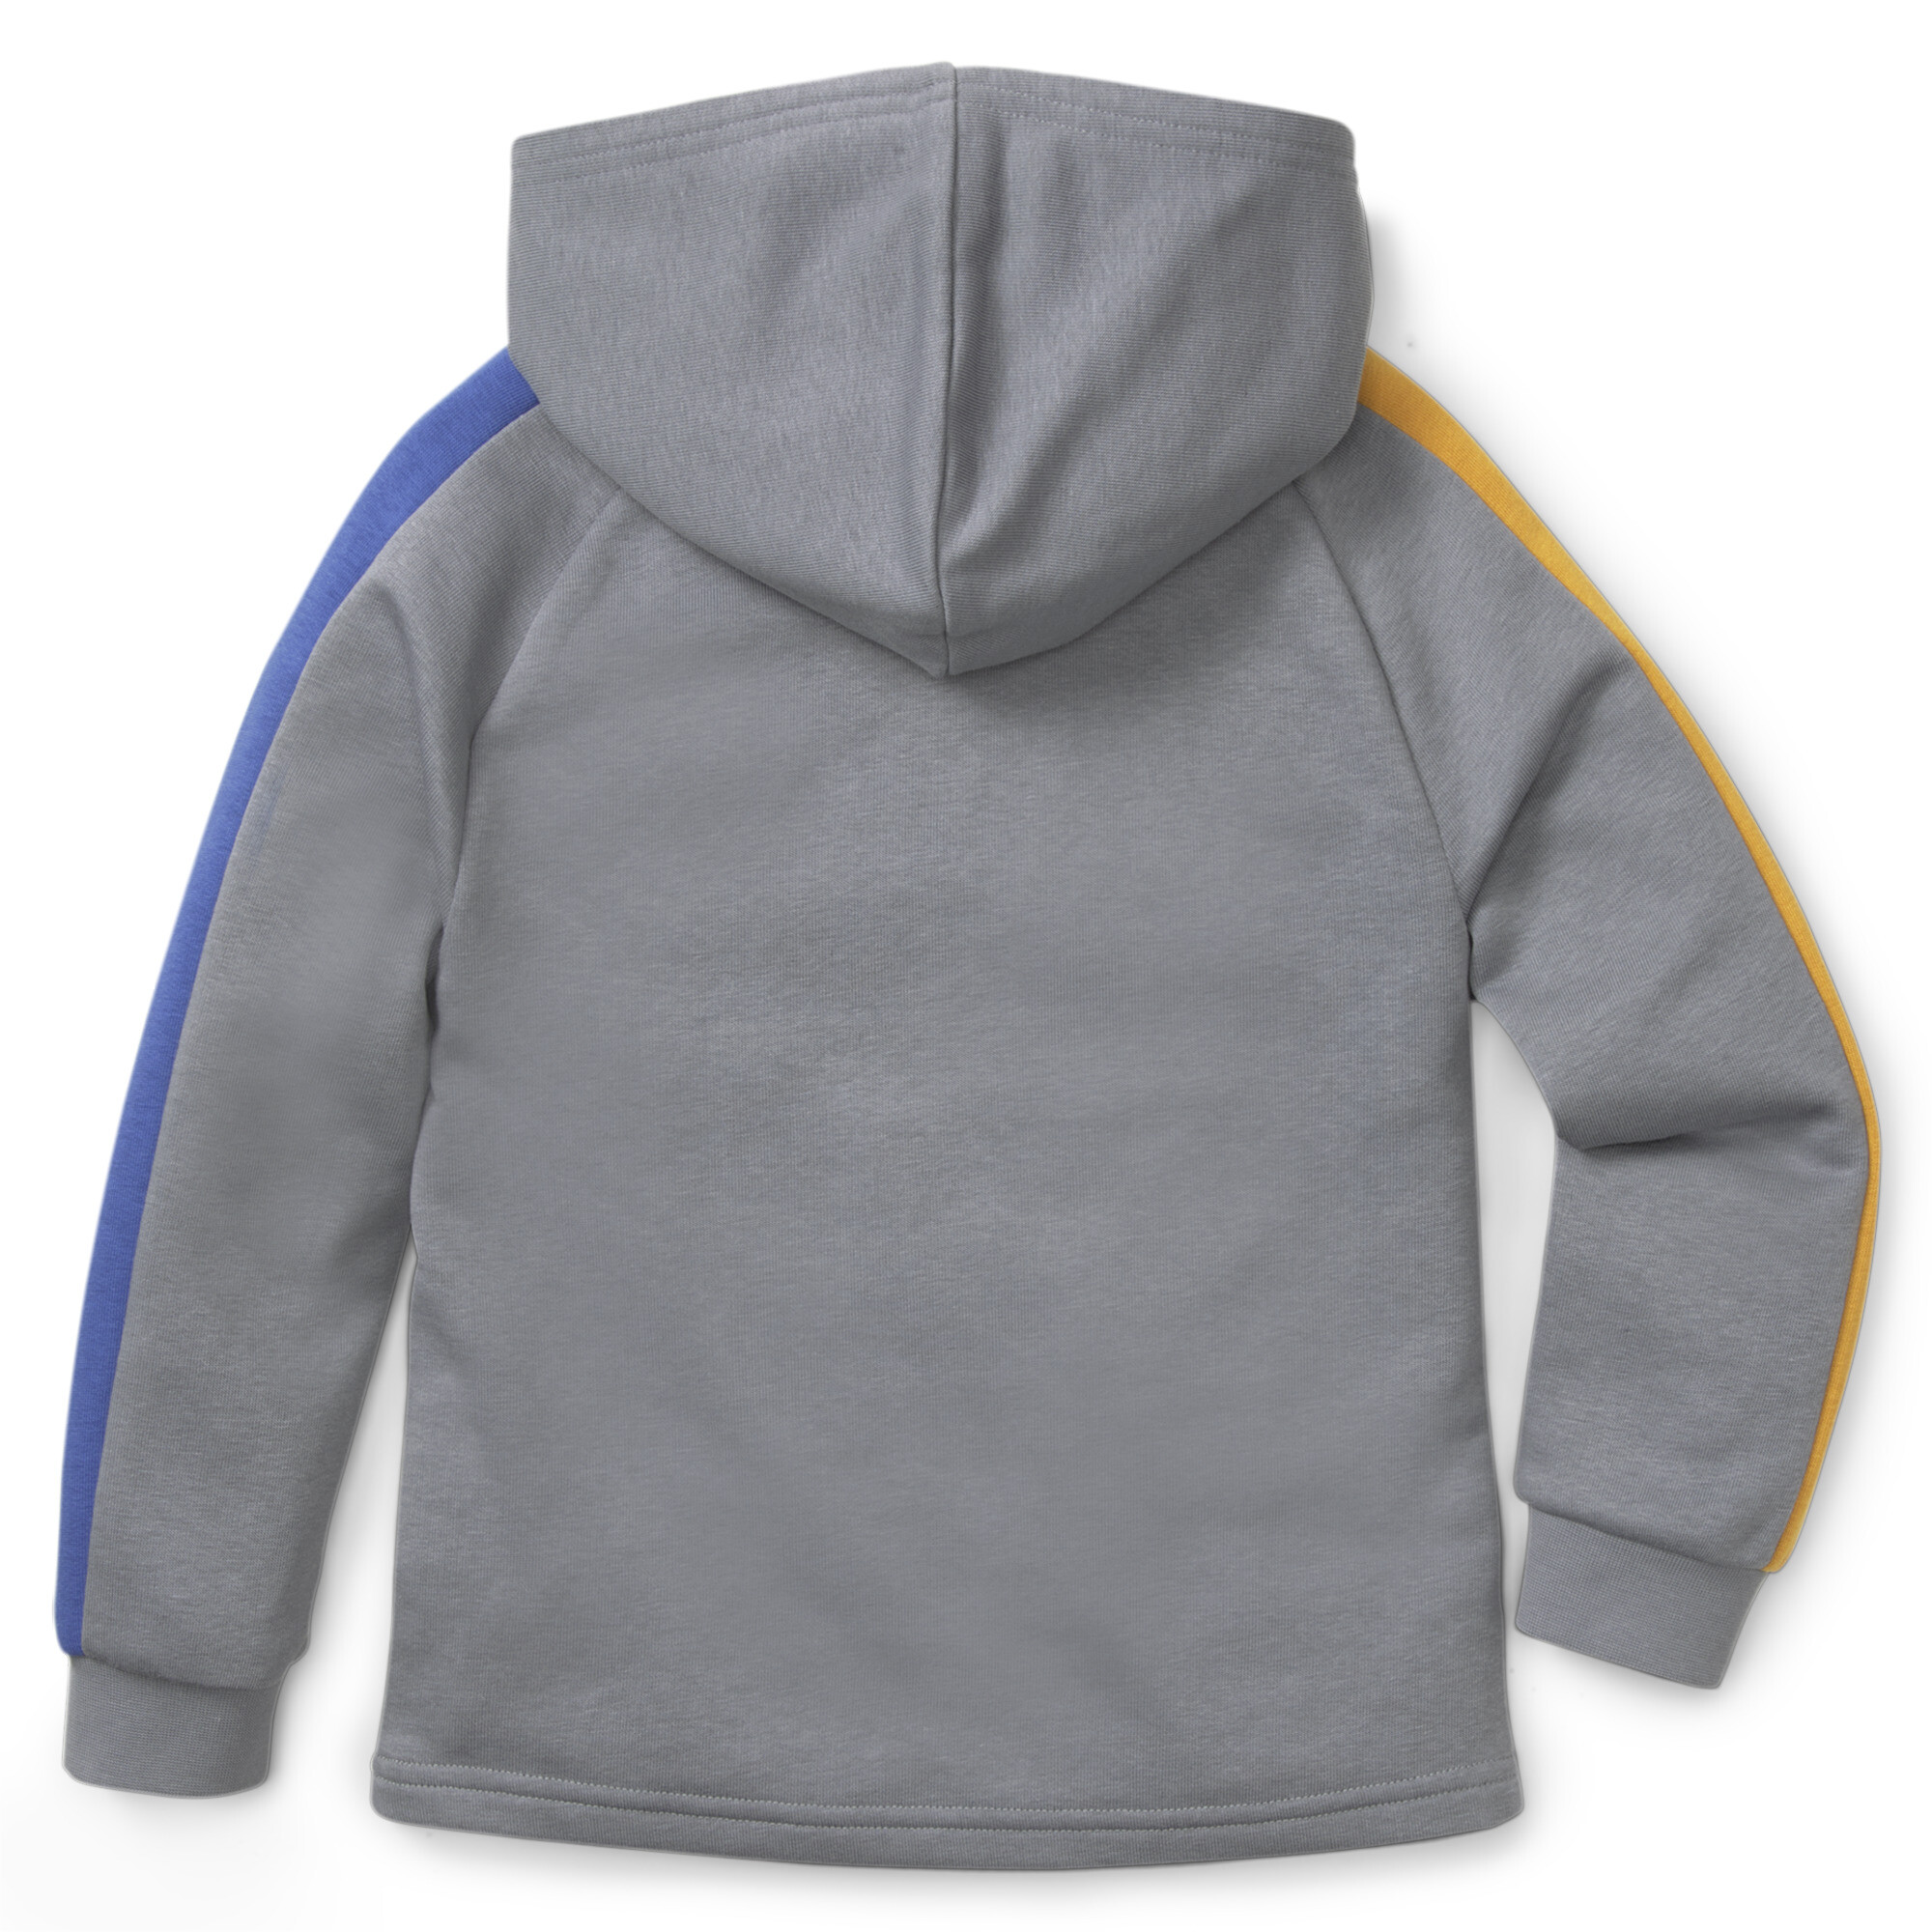 PUMA MATES T7 Hoodie Kids In Gray, Size 3-4 Youth